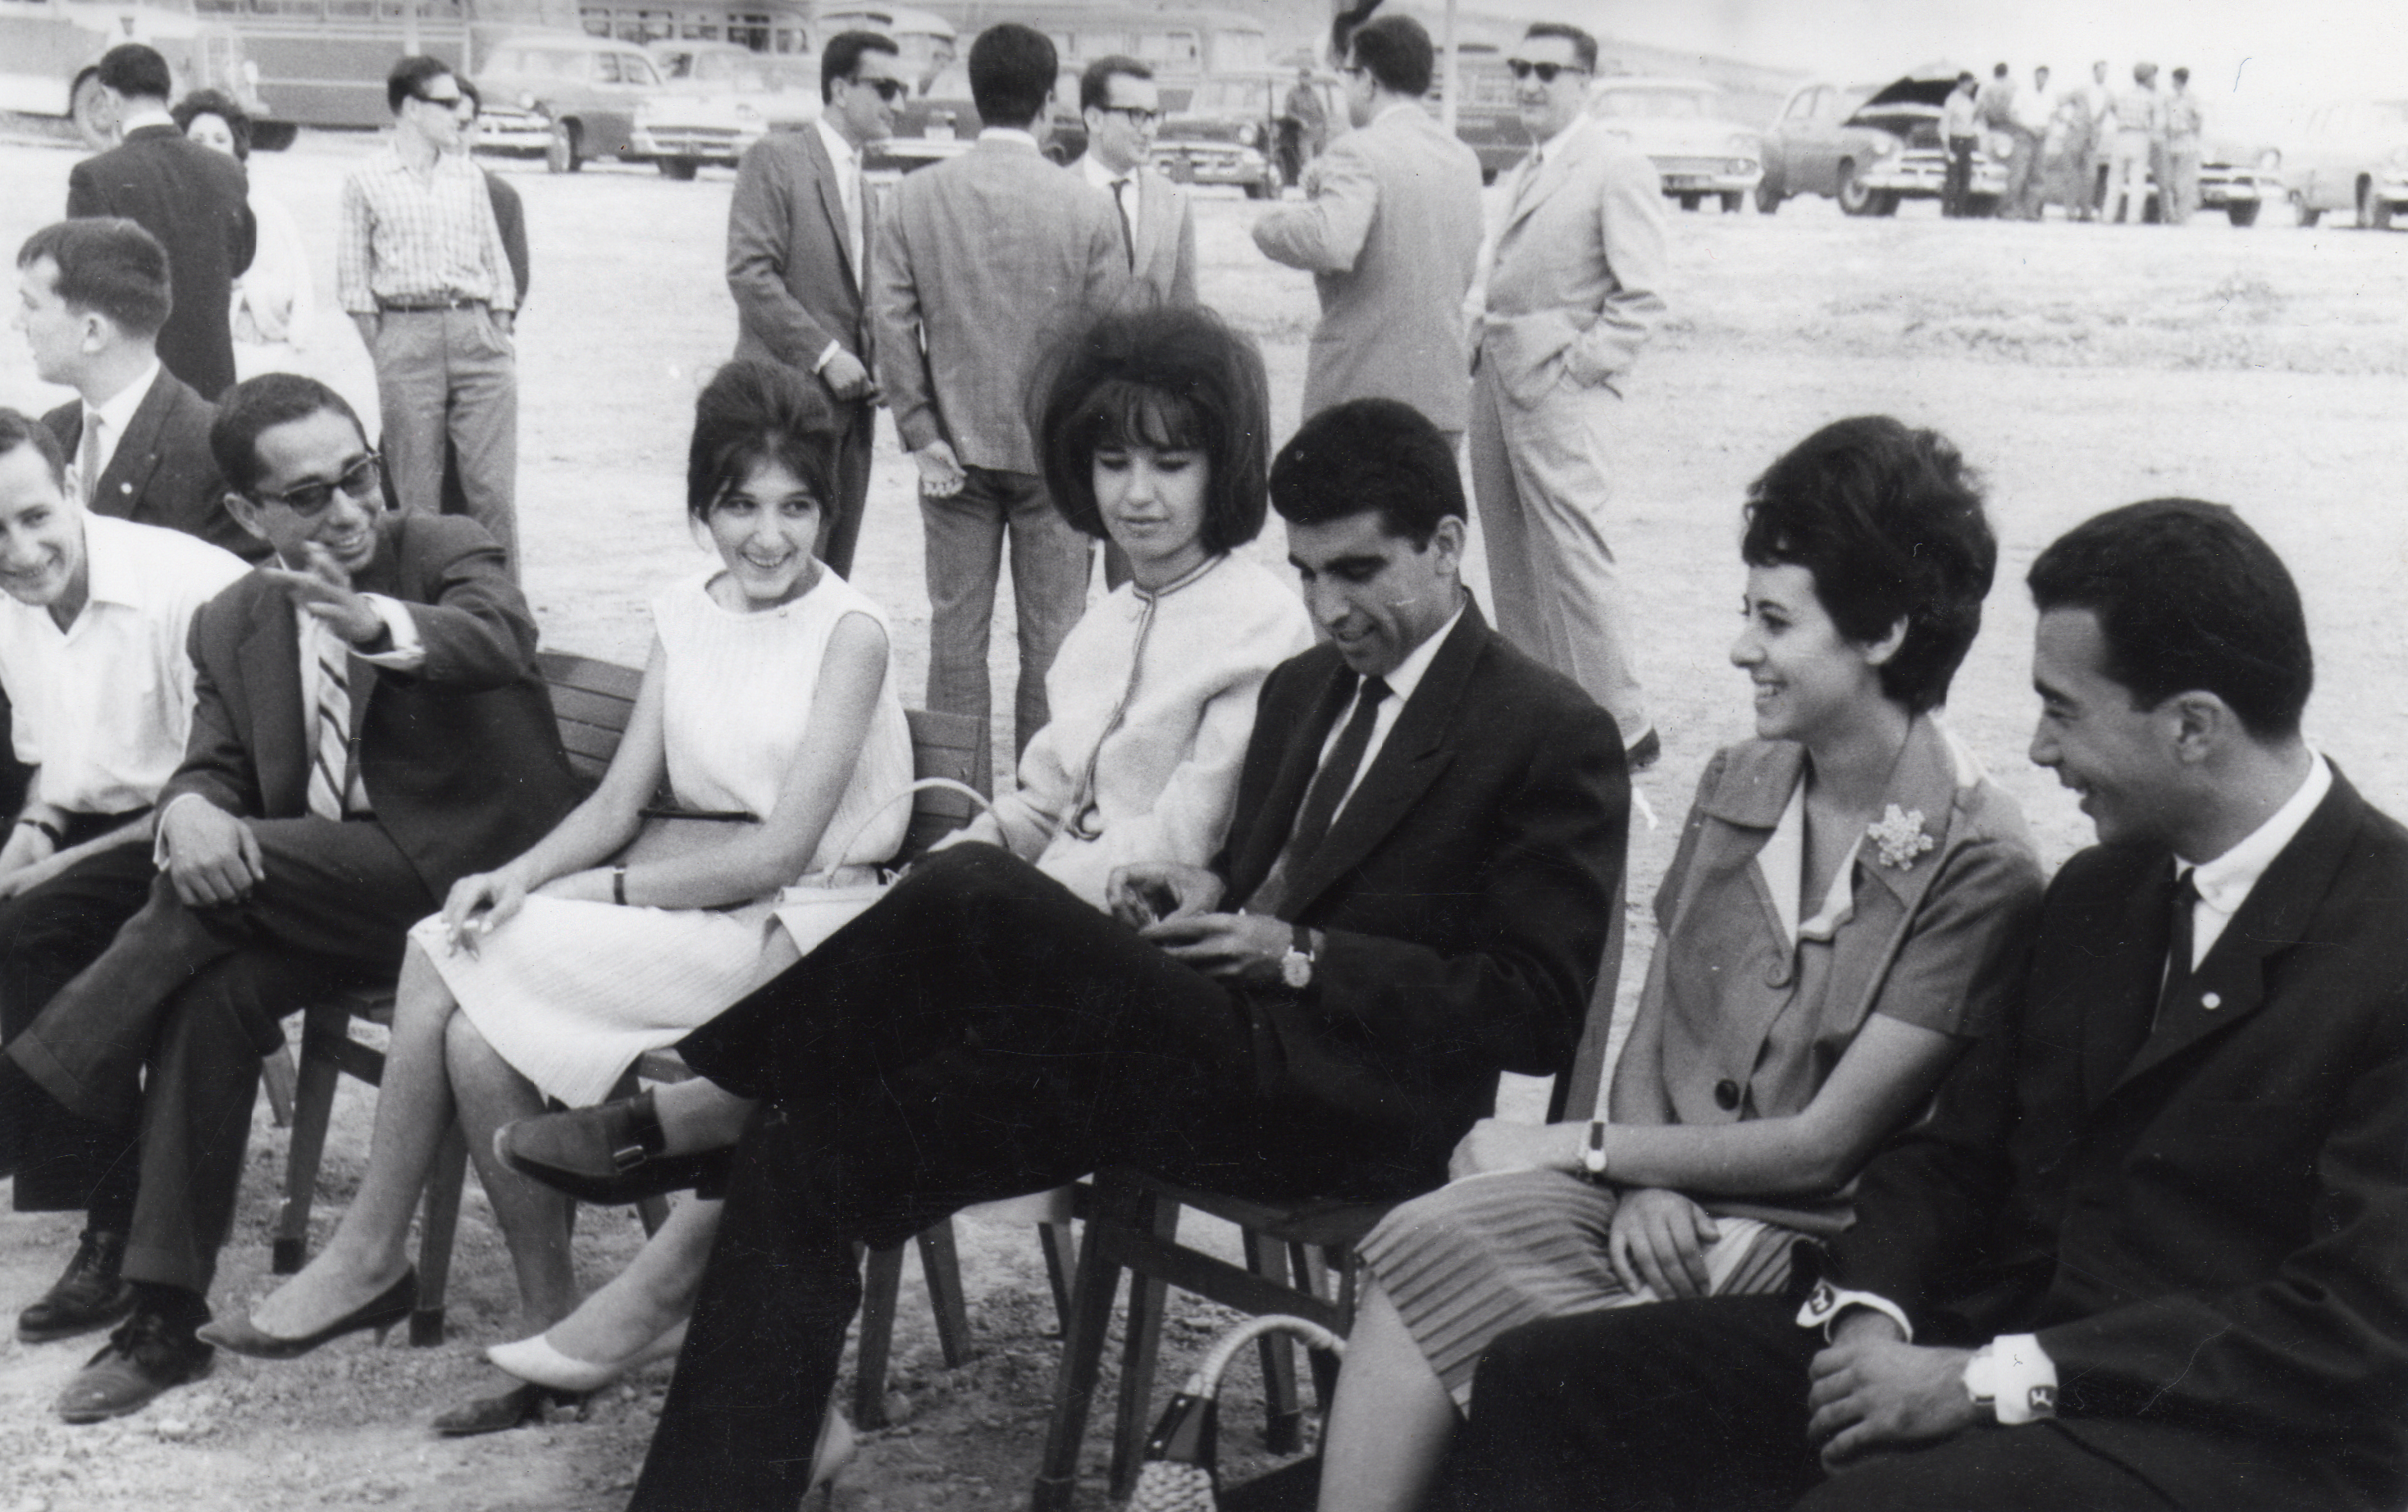 Students at the graduation ceremony in 1962